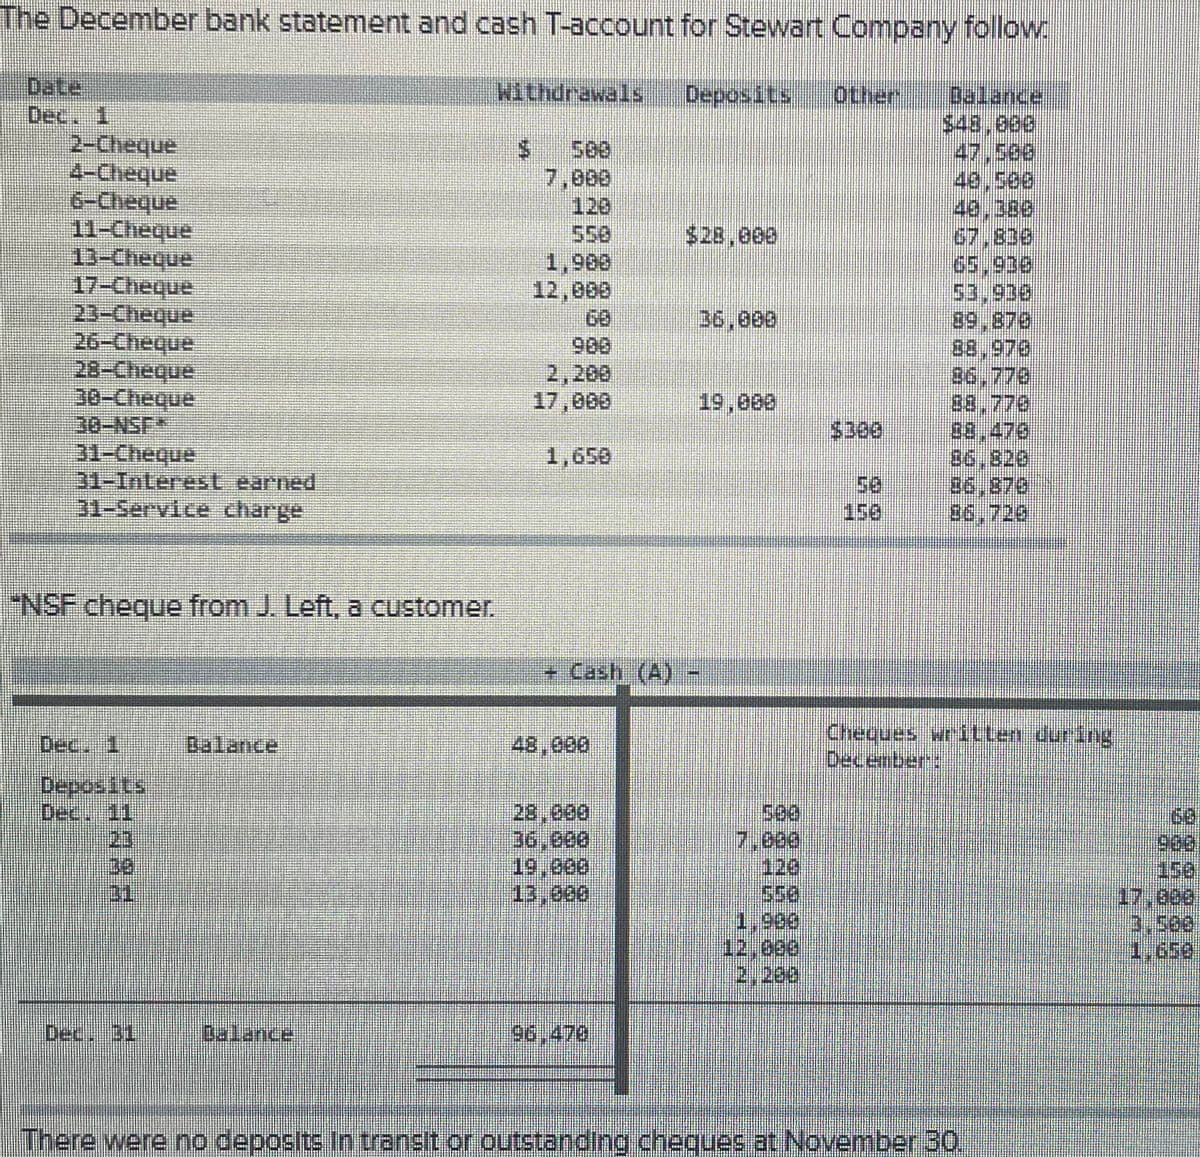 The December bank statement and cash T-account for Stewart Company follow:
Date
Dec. 1
Withdrawals
Deposits,
other.
Dalance.
$48,600
47,500
40,500
40,380
67,836
65,930
53,930
89,870
38,970
36.770
00,770
88,470,
86,820
86,876
D6,720
anba
4-Cheque
7,000
120
558
1,900
12,000
anba-
$28,000
13-Cheque
17-Cheque
23-Cheque
26-Cheque
28-Cheque
30-Cheque
30-NSF*
31-Cheque
31-Interest earned
31-Service charge
60
36,000
2,200
17,800
$300
1,650
156
"NSF cheque from J. Left, a customer.
+ Cash (A).
Cheques written dur ing
December e
Dec. 1
Balance
48,000
28,000
36,000
Dec. 11
23
30
31
68,
7,000
120
156
17,000
3,500
1,650
13,000
1,980
2,200
Dec, 31
Dalance
96,470
There were no deposits In transit or outstanding cheques at November 30.
